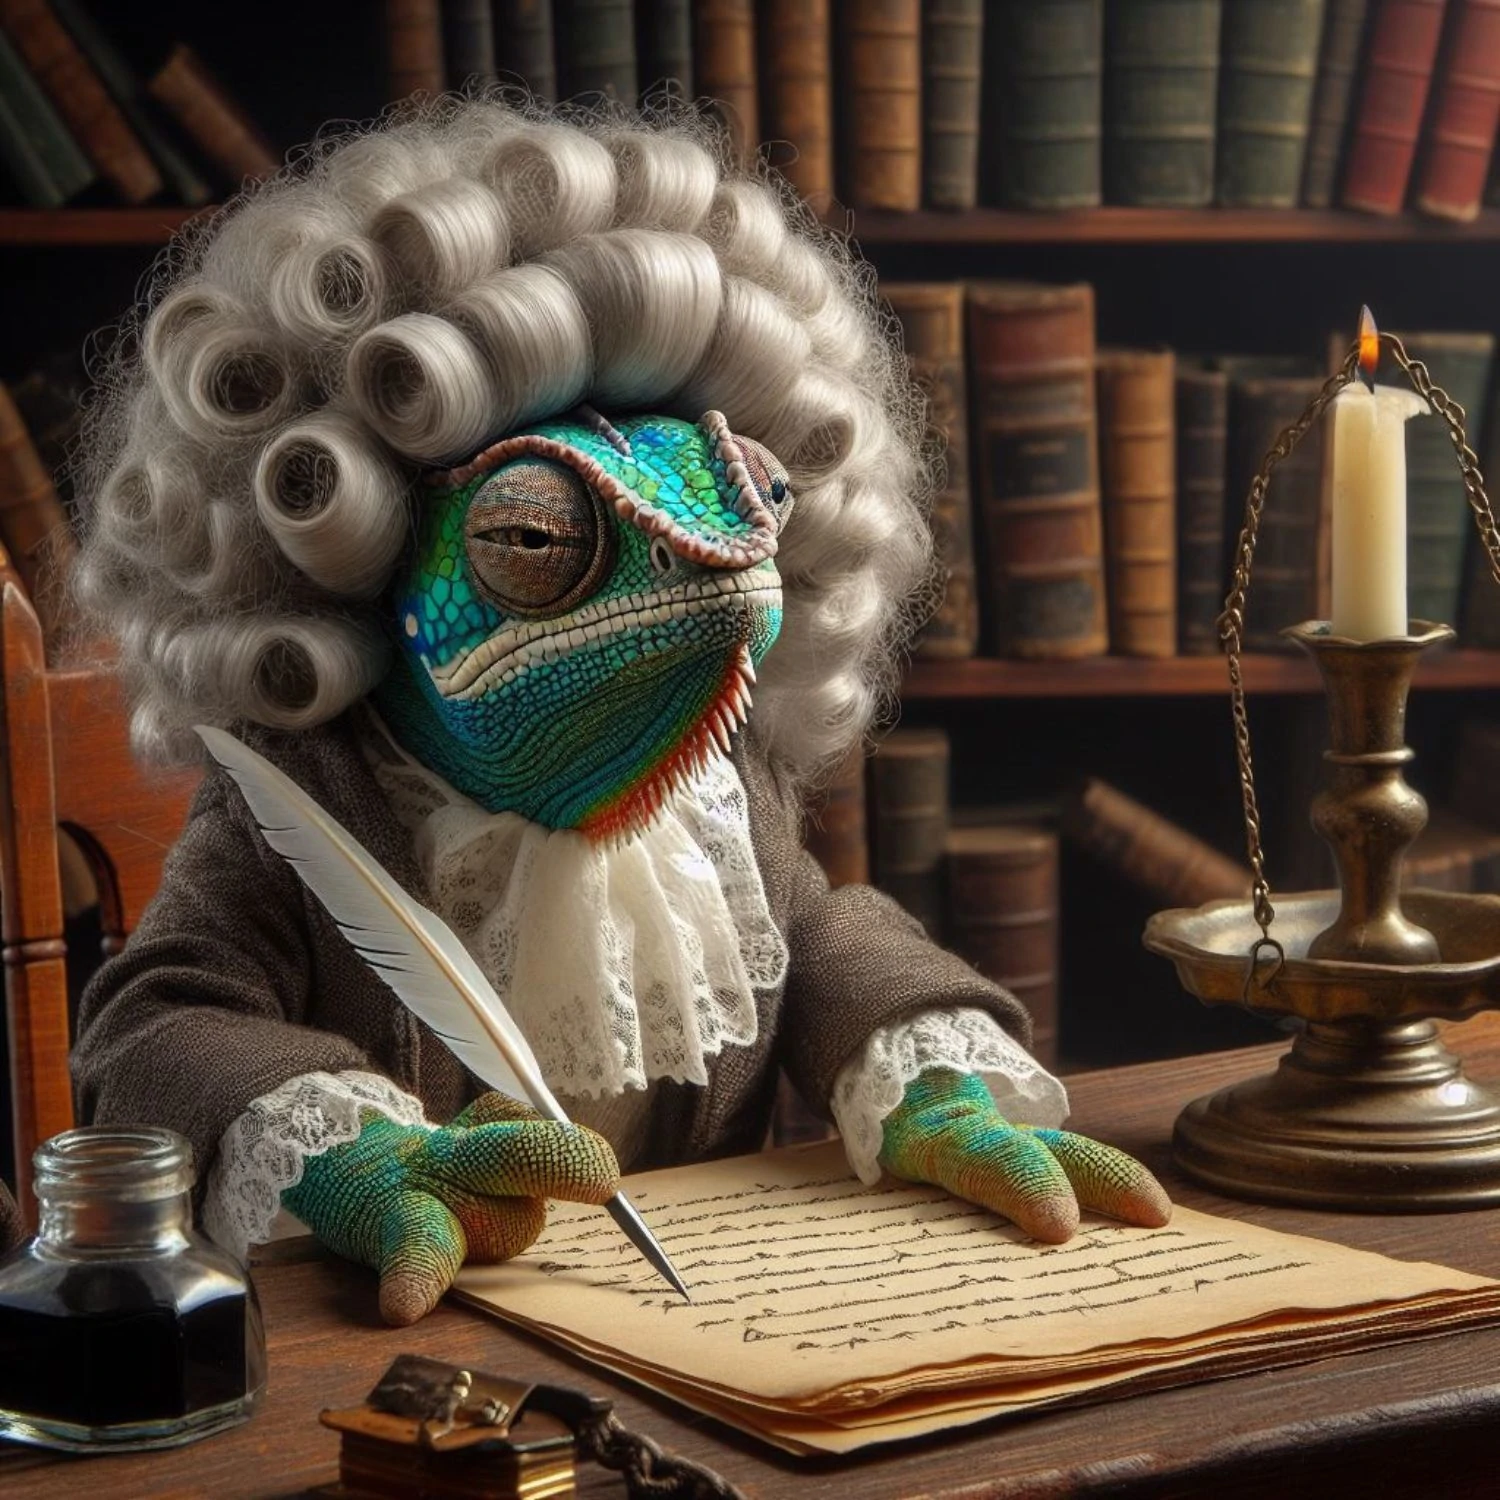 A chameleon wearing an old white wig trying to find his voice by writing